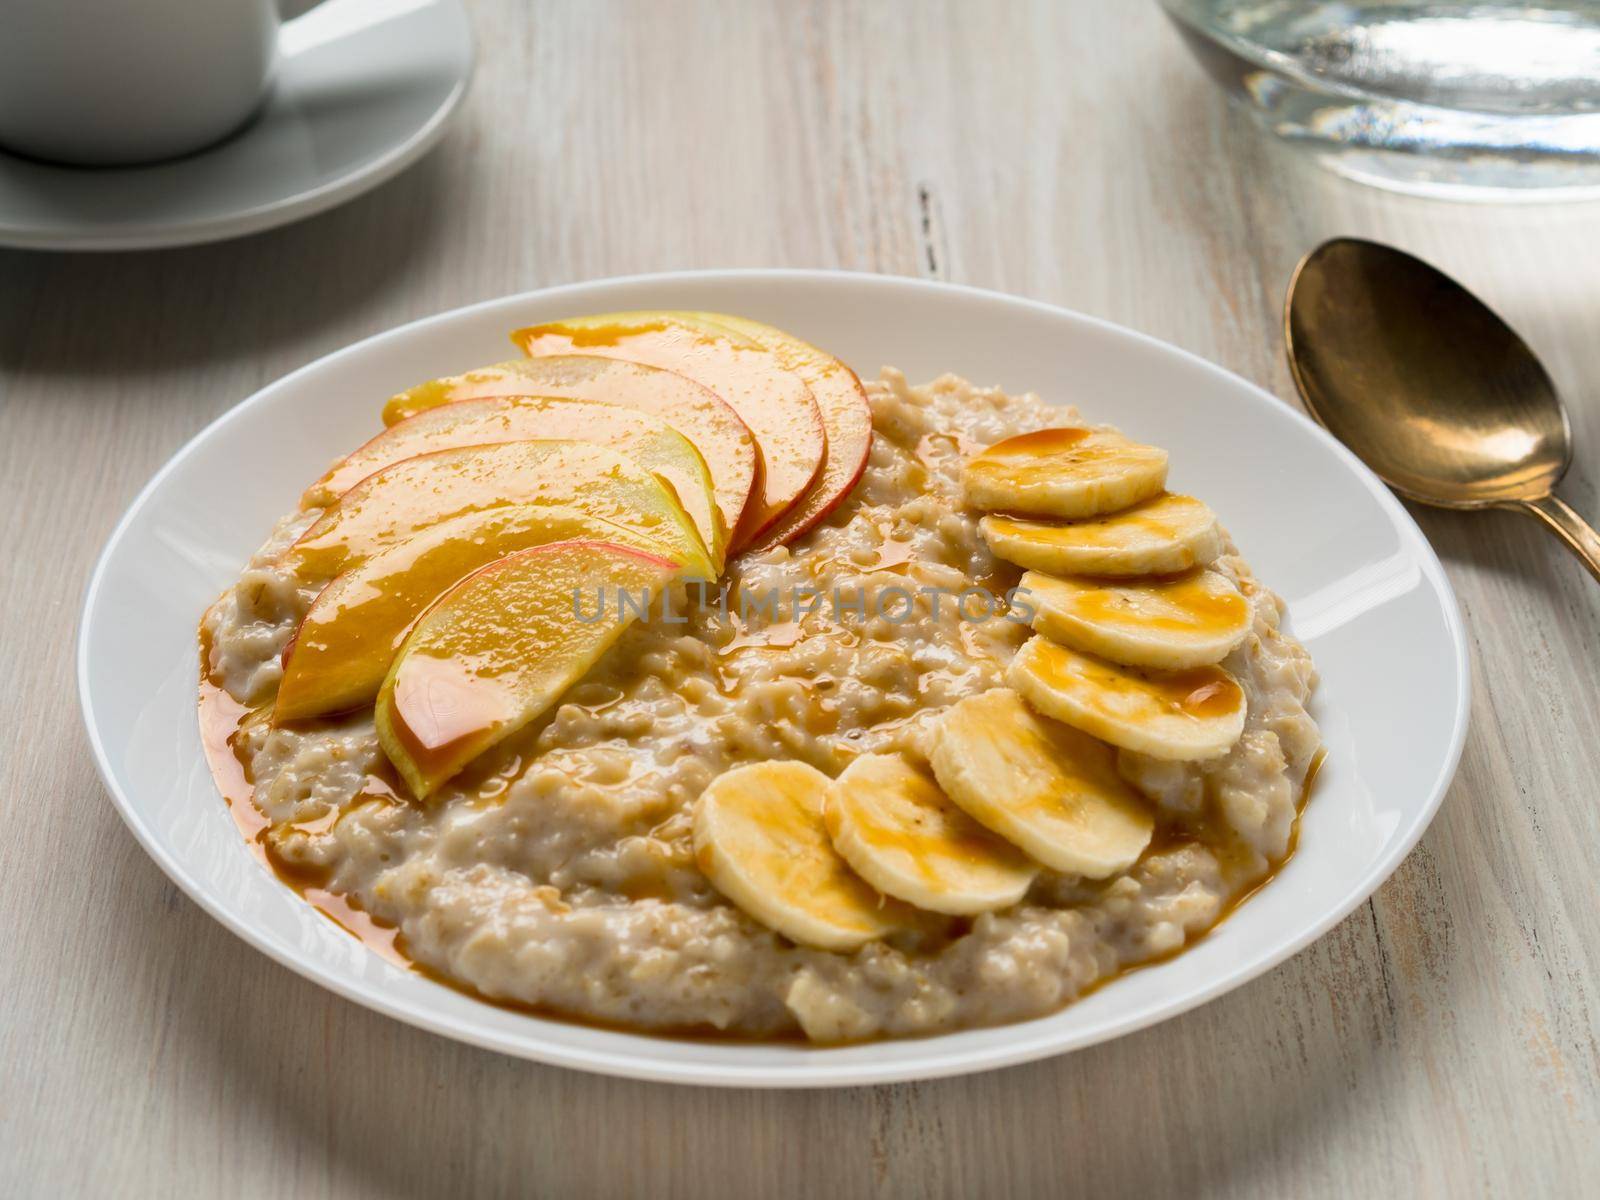 Healthy Breakfast in the morning - oatmeal with fruit and honey, slices of apples and bananas, caramel syrup. by NataBene